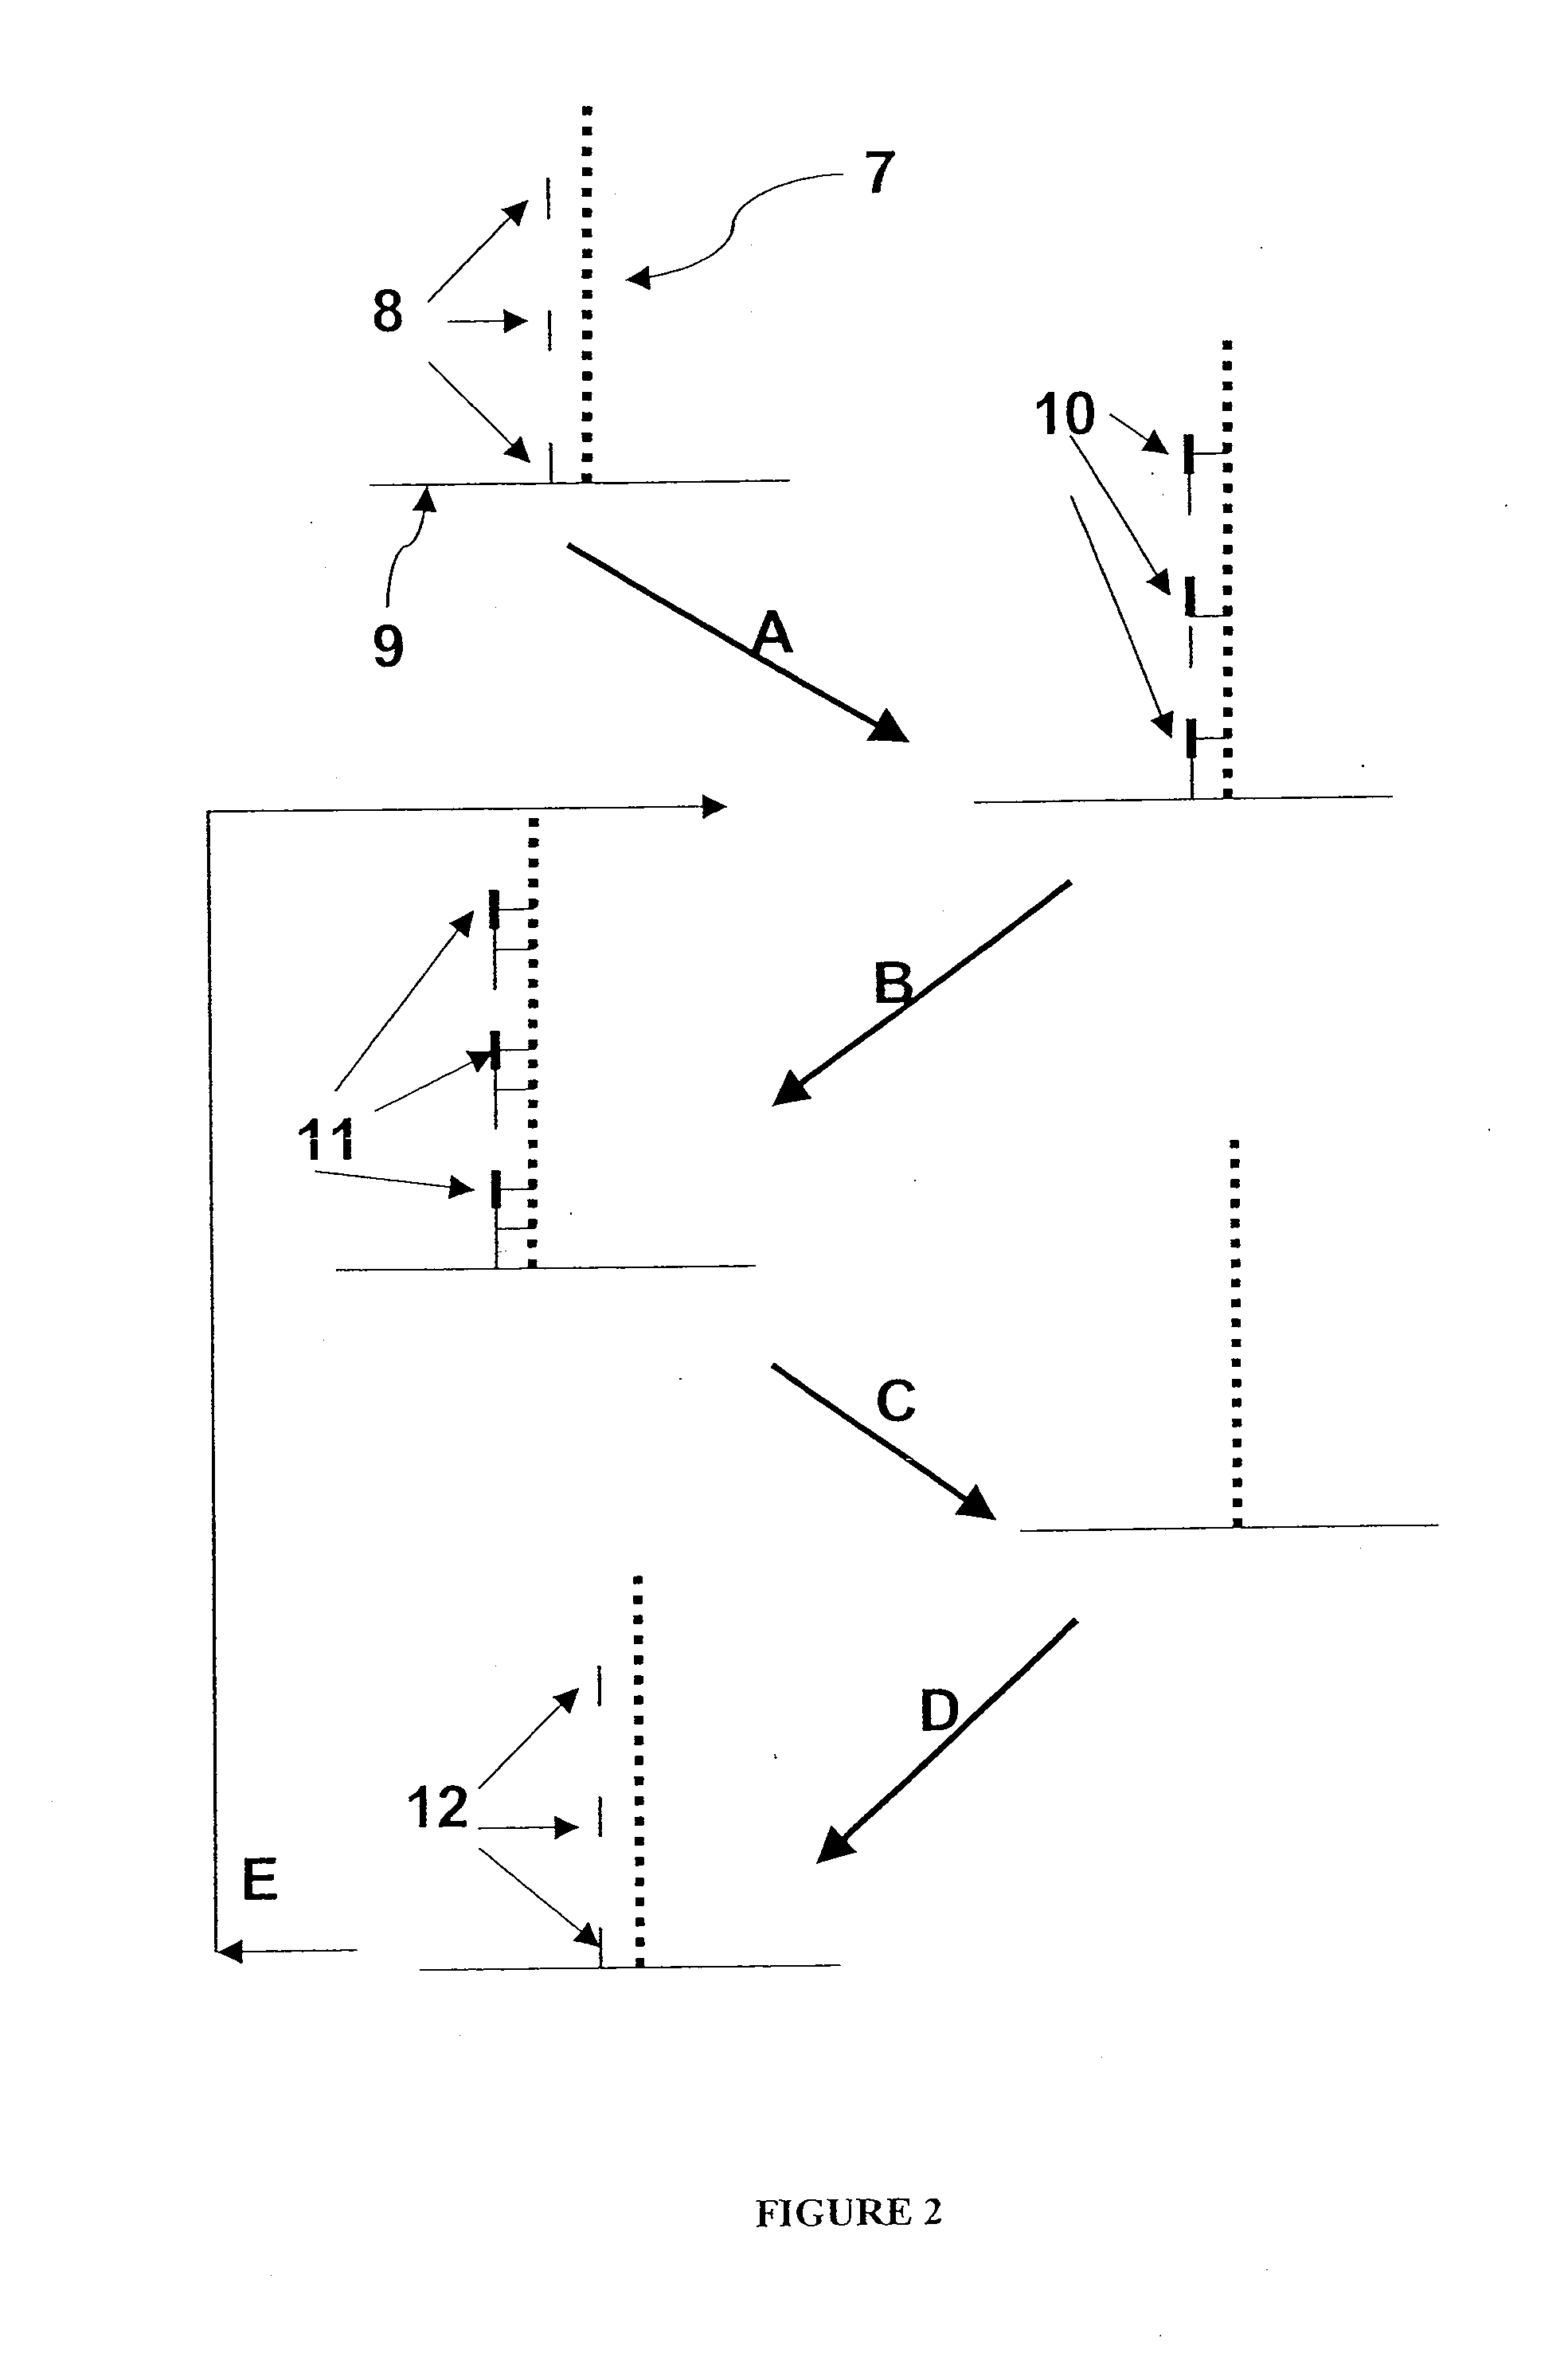 Methods for increasing accuracy of nucleic scid sequencing